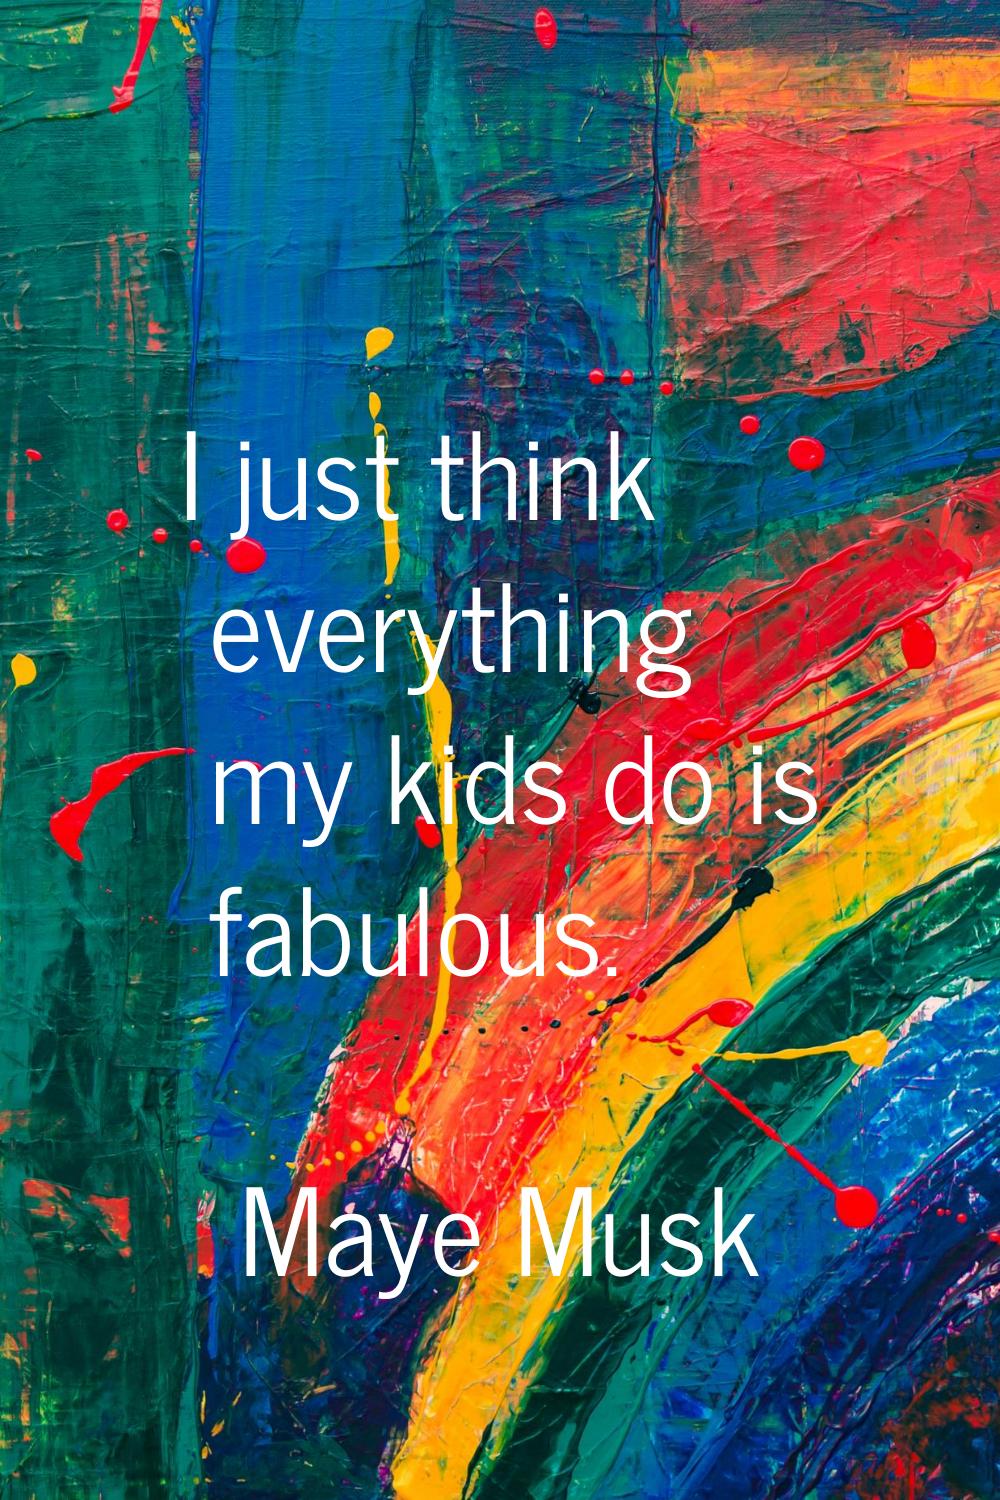 I just think everything my kids do is fabulous.